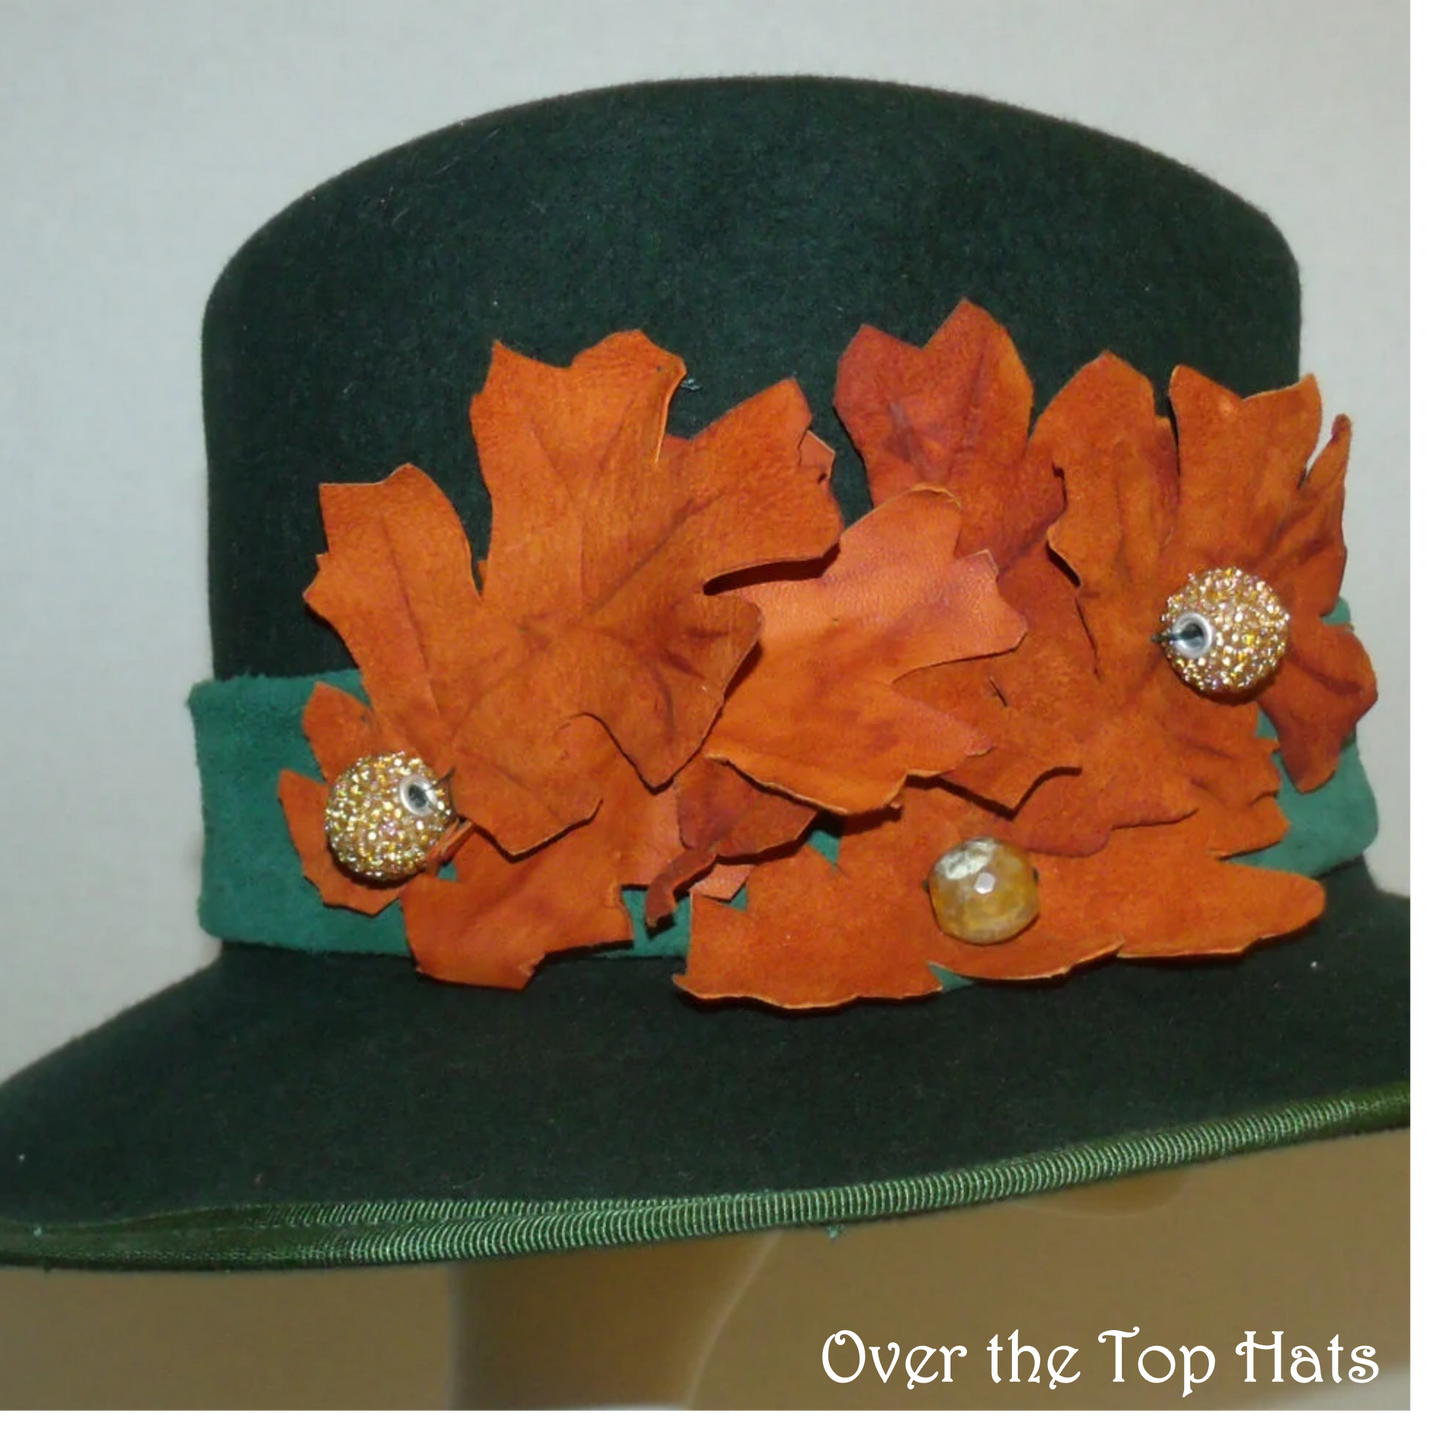 Green Felt Fedora with Green Leather Band and Hand Tooled Leather leaves